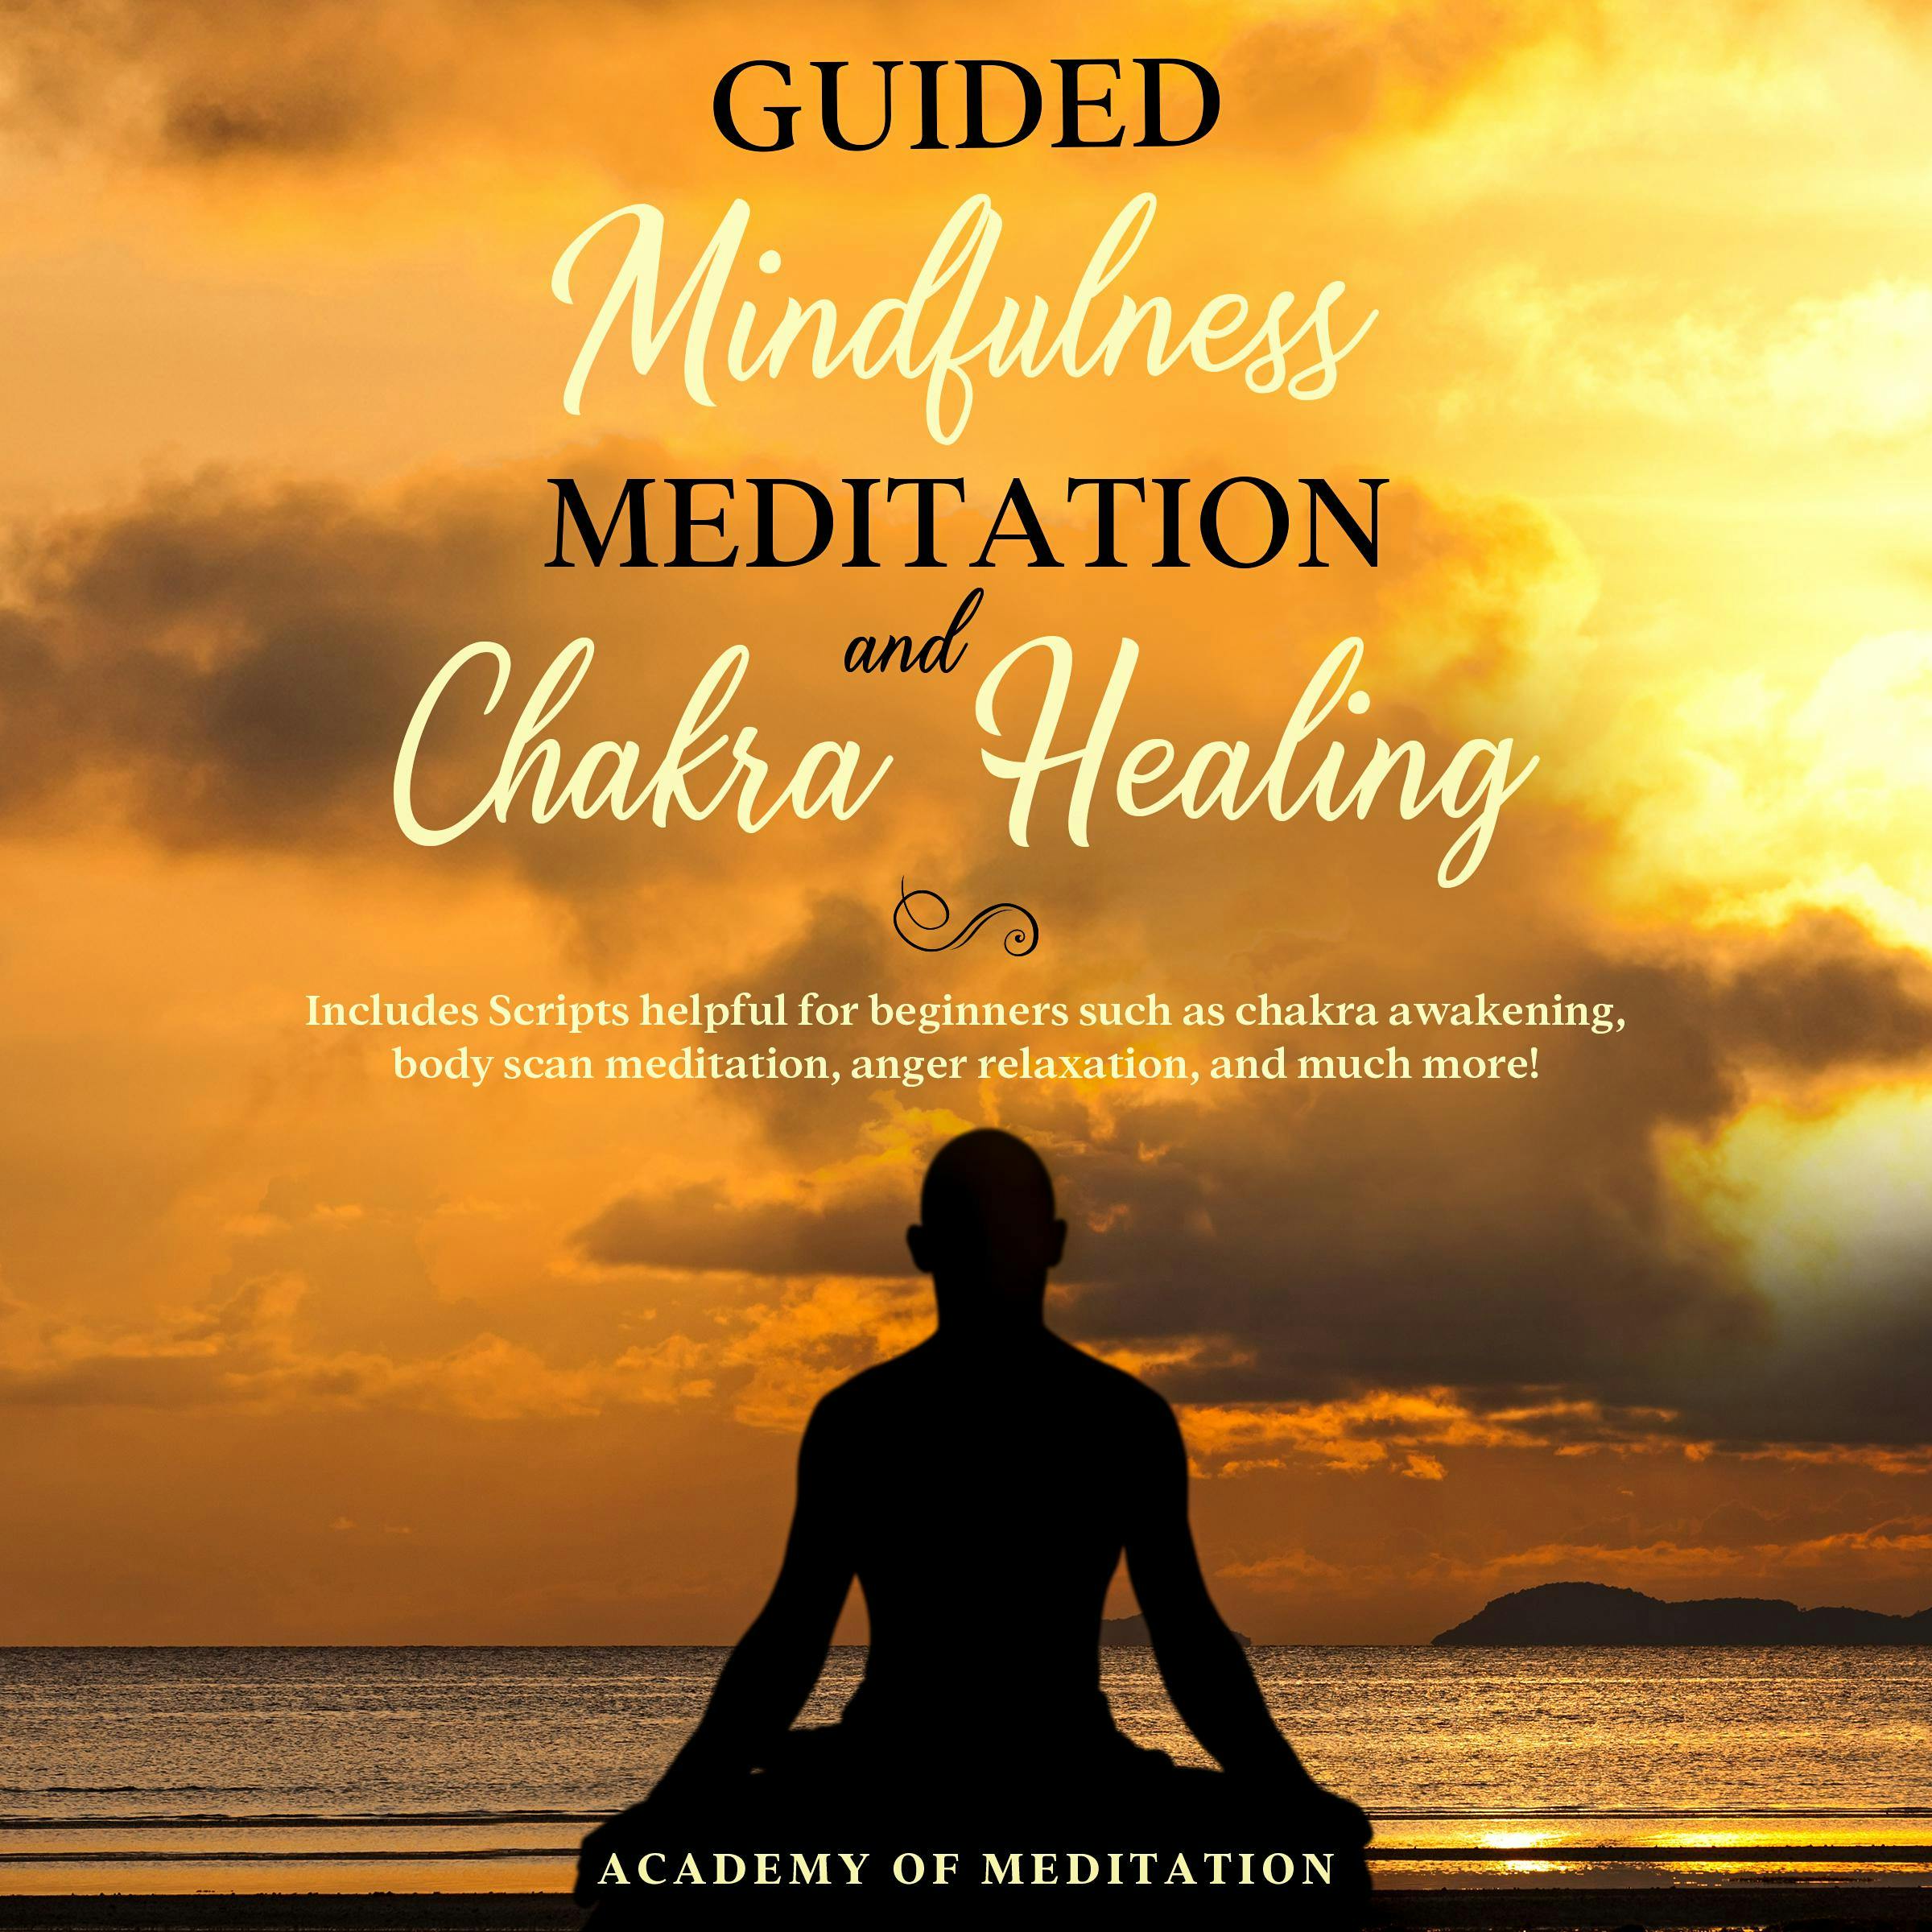 Guided Mindfulness Meditation And Chakra Healing: Includes scripts helpful for beginners such as: Reiki Healing Chakra, Awakening Body, Scan Meditation, Anger Relaxation and Much More! - Academy Of Meditation